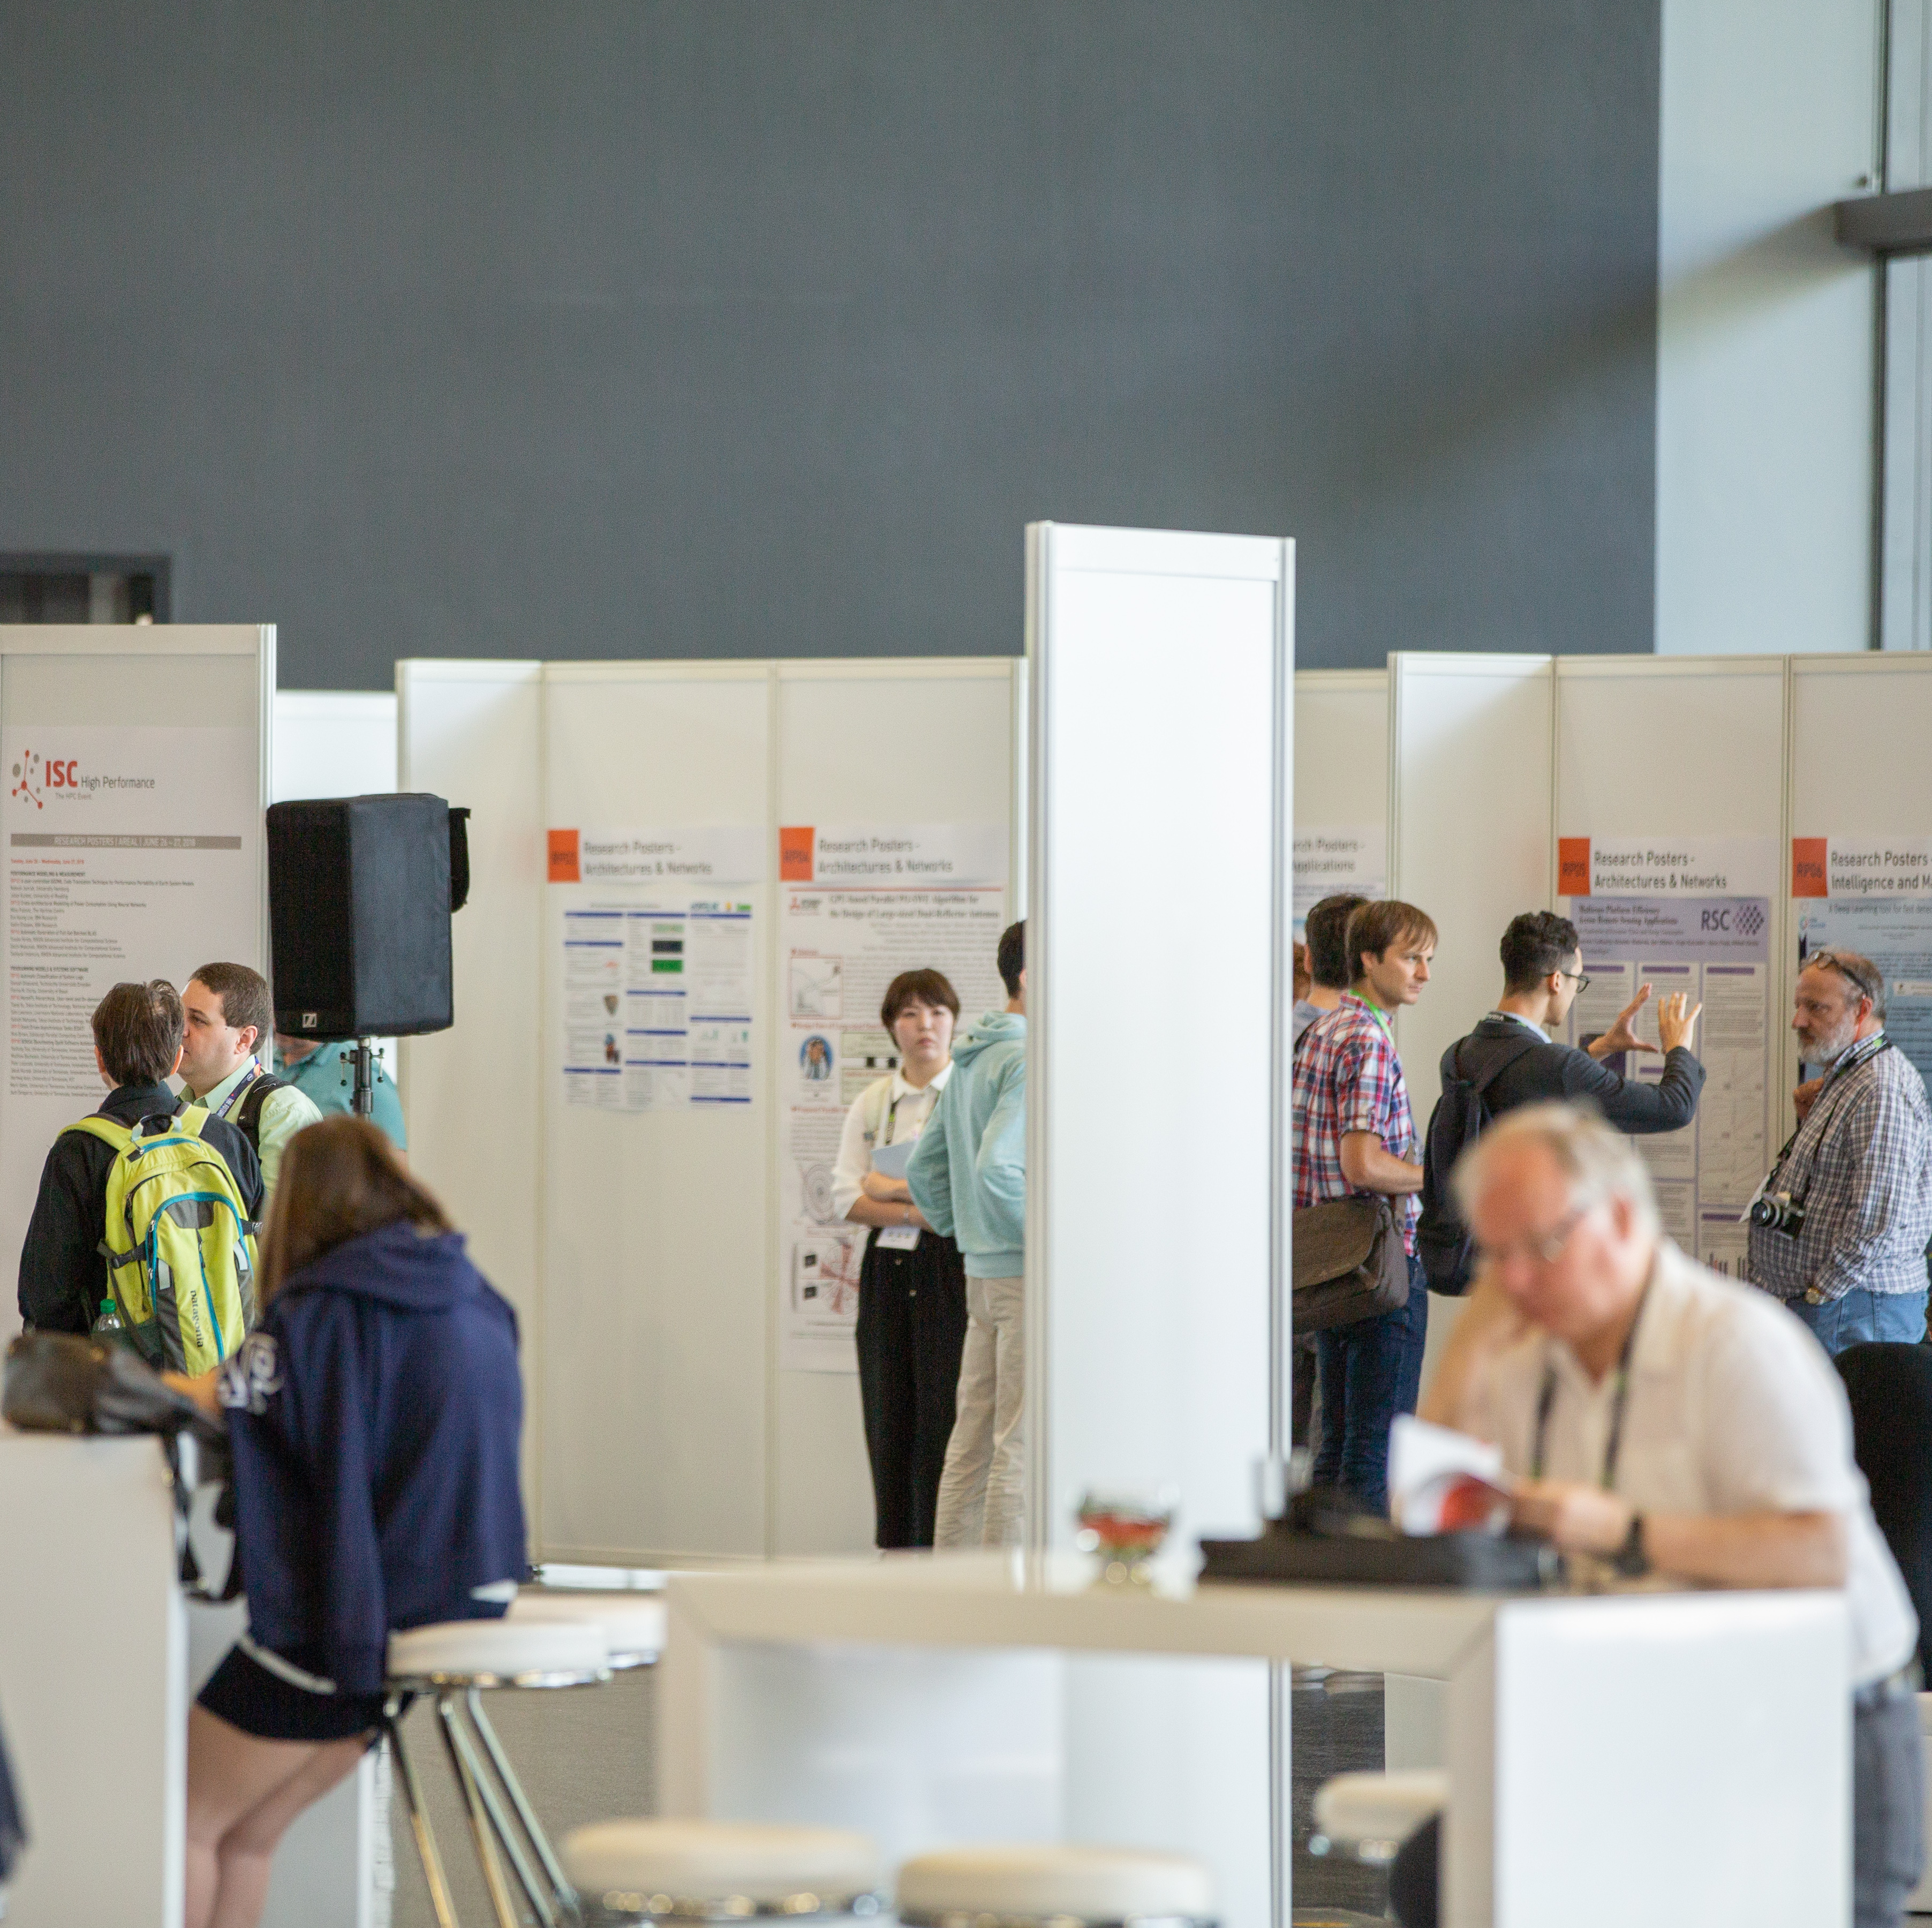 ISC2018 Research Posters